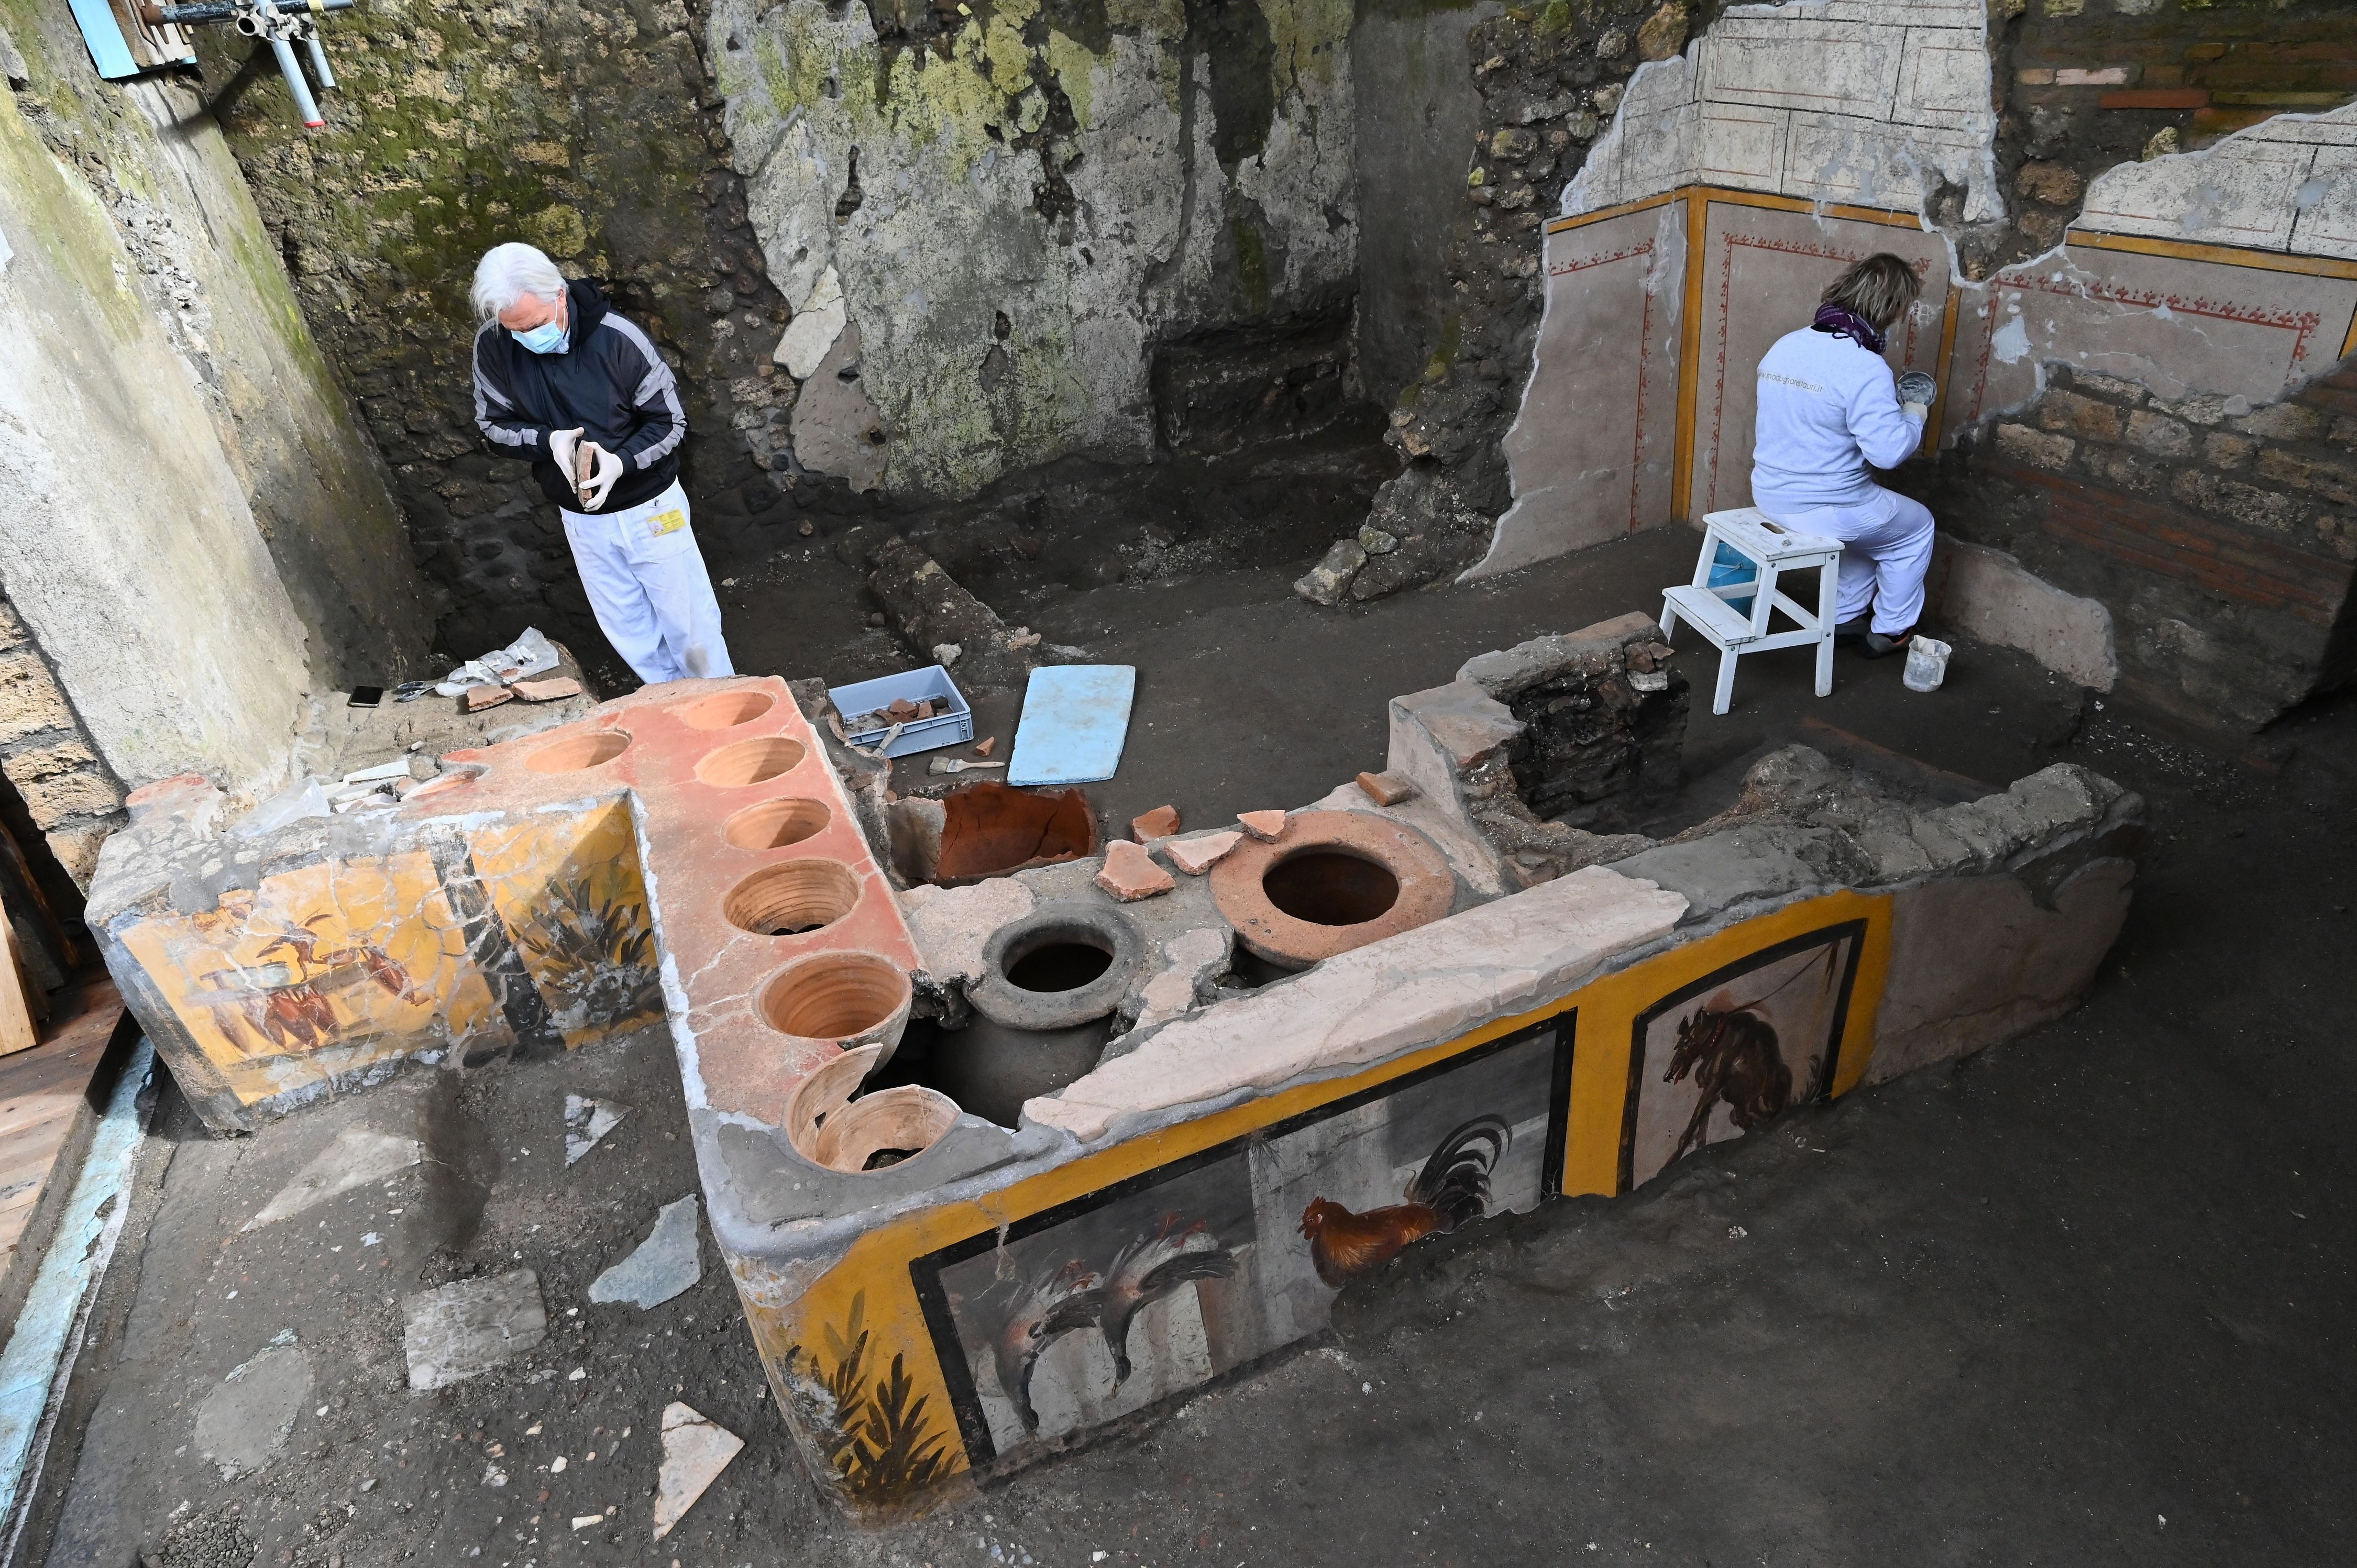 The thermopolium was the ancient equivalent of a modern-day snack bar for Pompeii residents